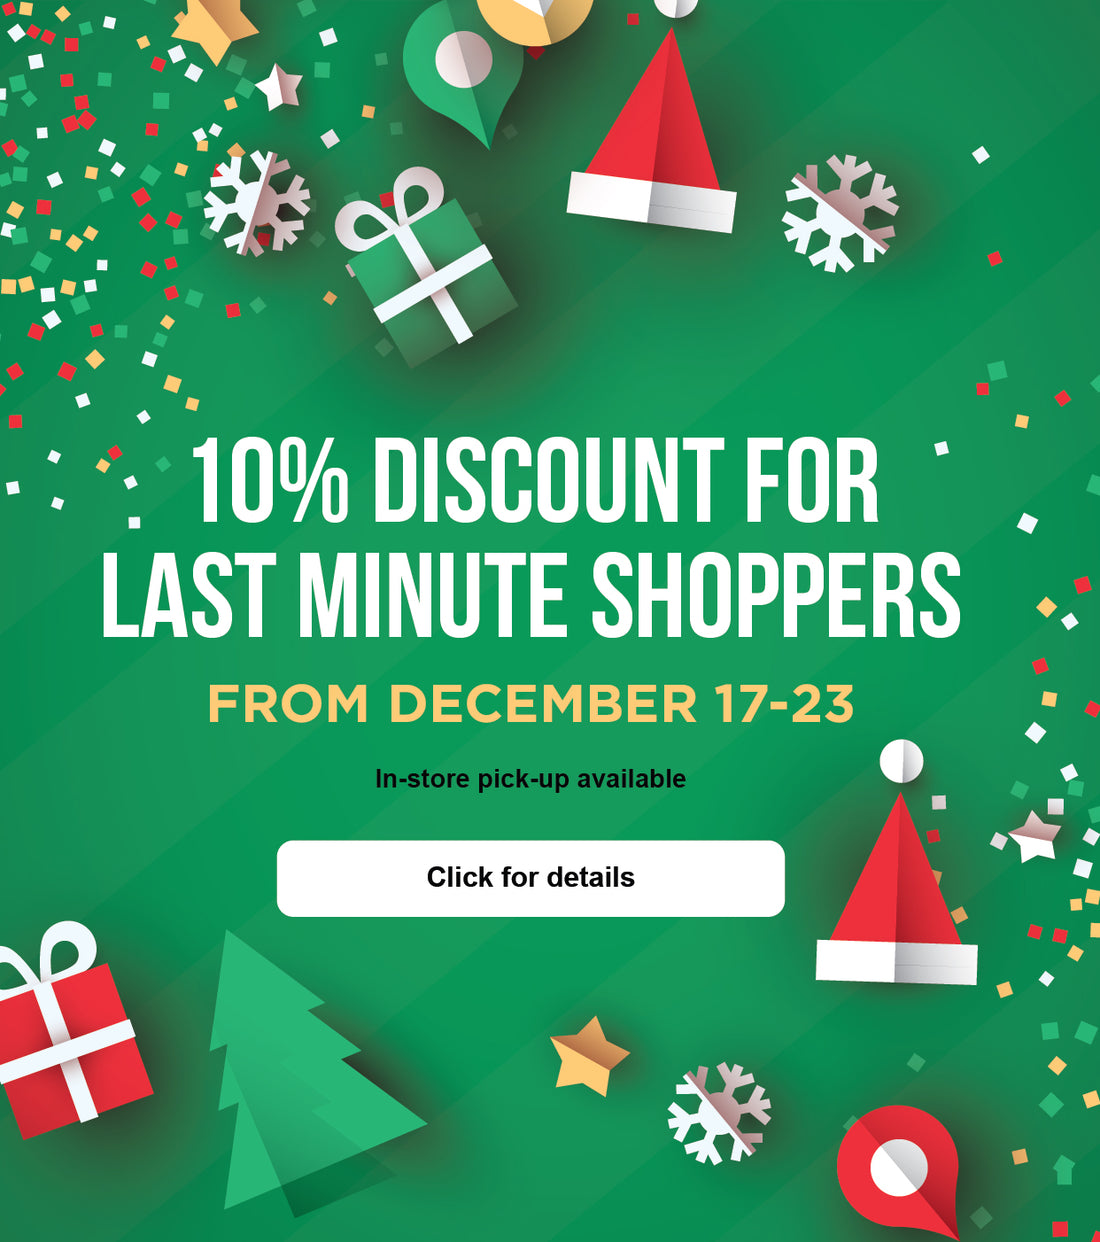 Last minute shopping?  Here's a 10% gift for you!